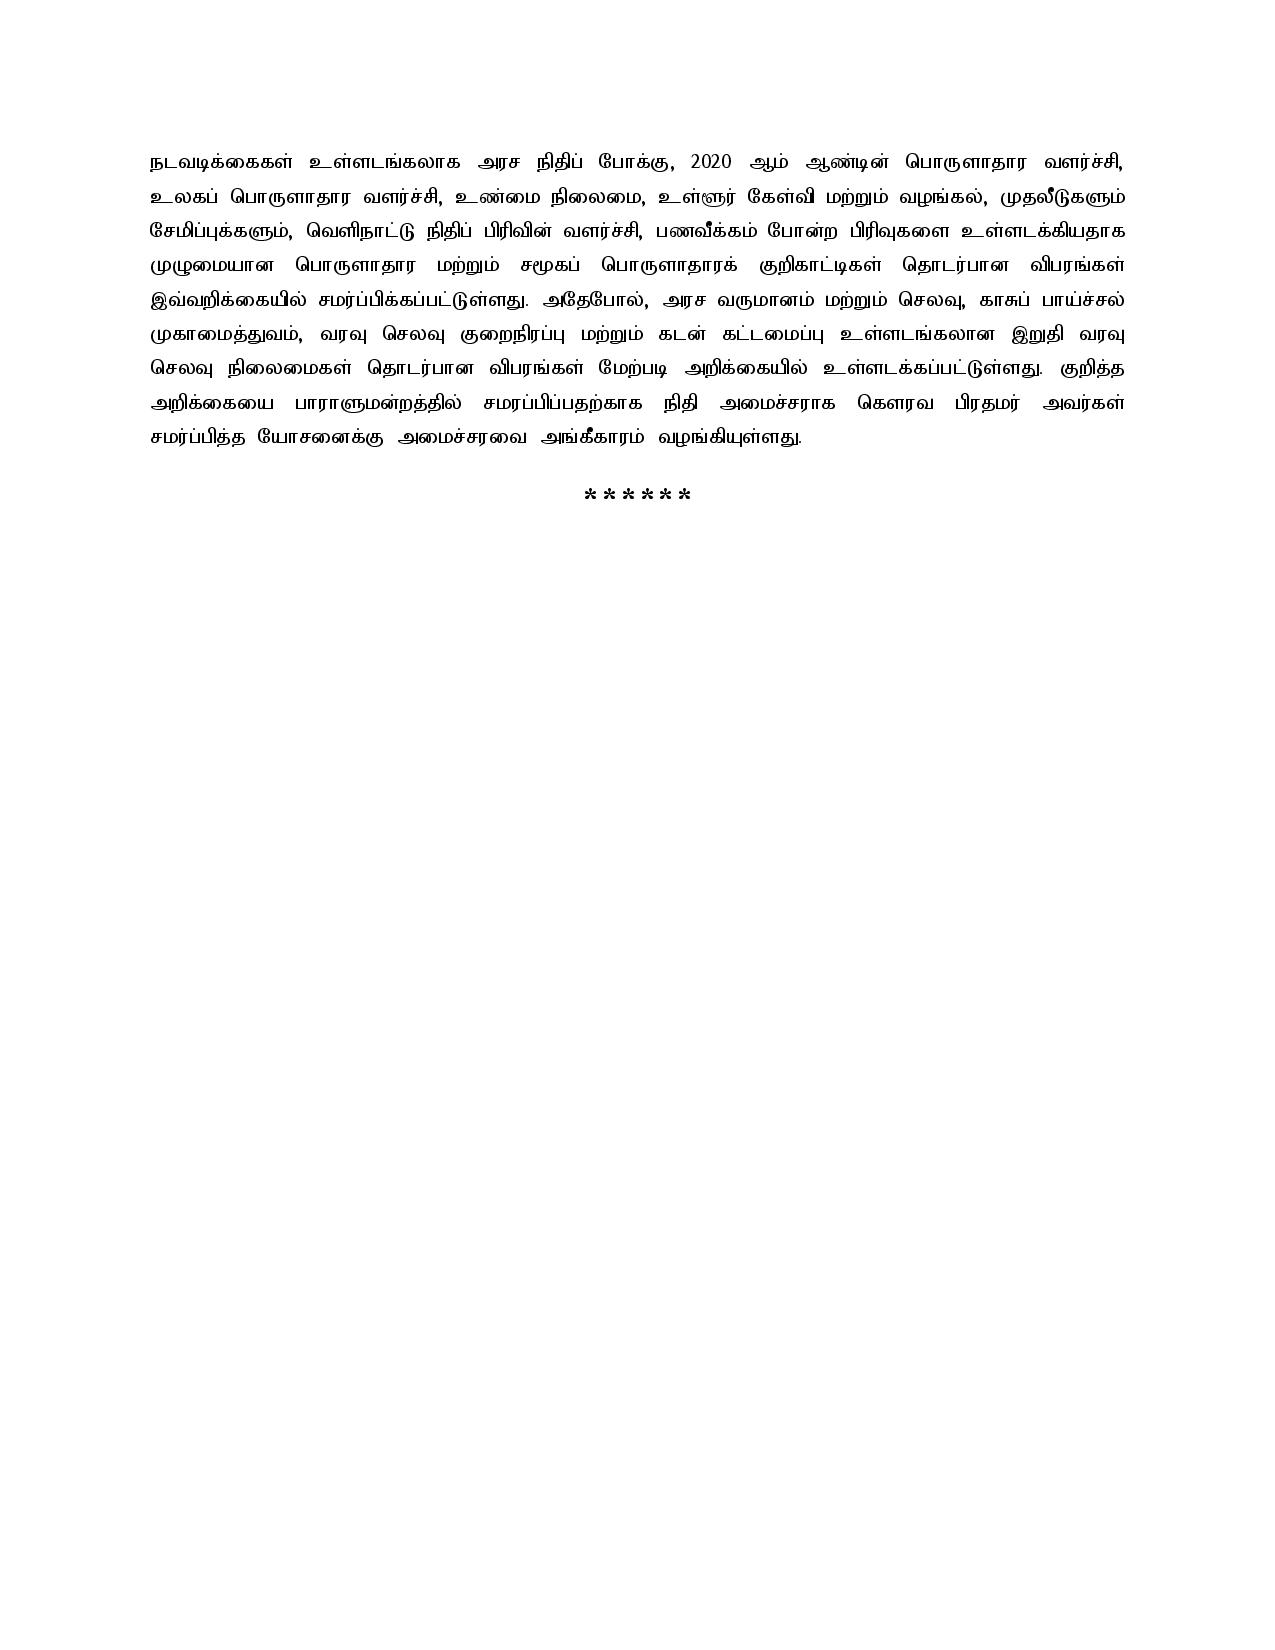 Cabinet Decisions 14.06.2021 Tamil page 005